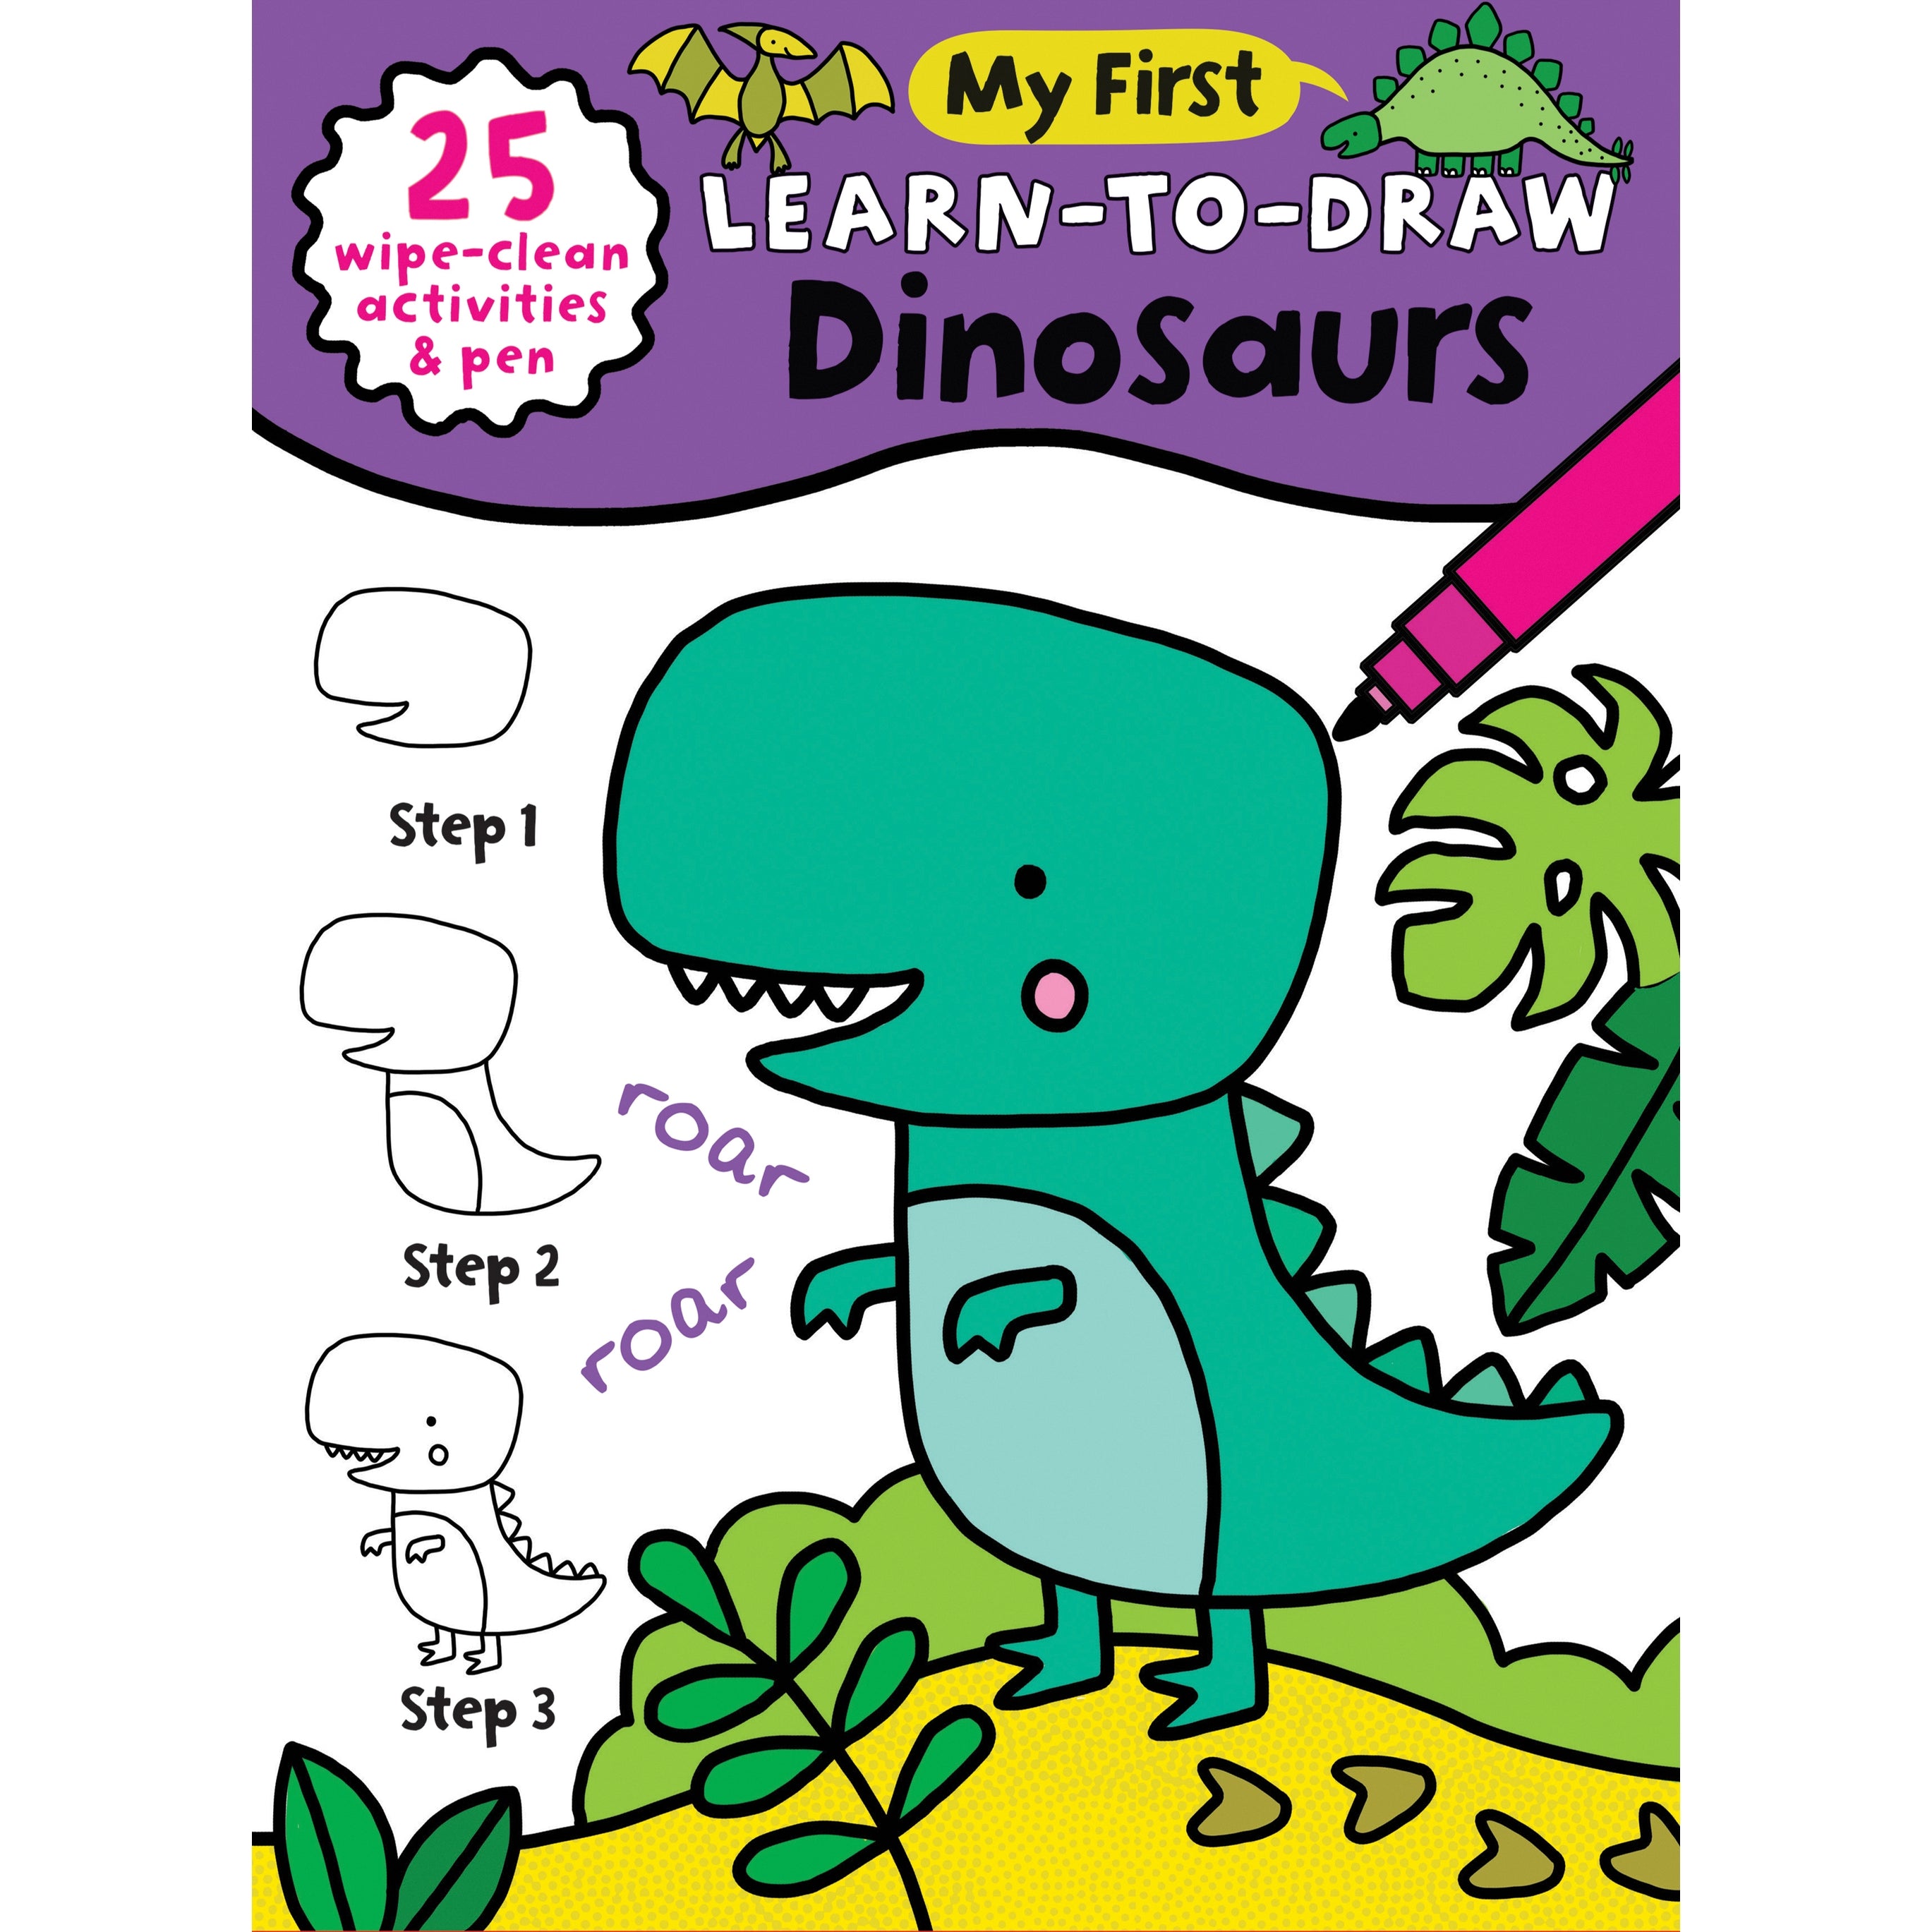 How to Draw Dinosaurs for Kids : Drawing Workbook for Kids Ages 8-12: Learn  to Draw for Kids | Easy Grid Drawing Book for Kids who Love Dinosaurs